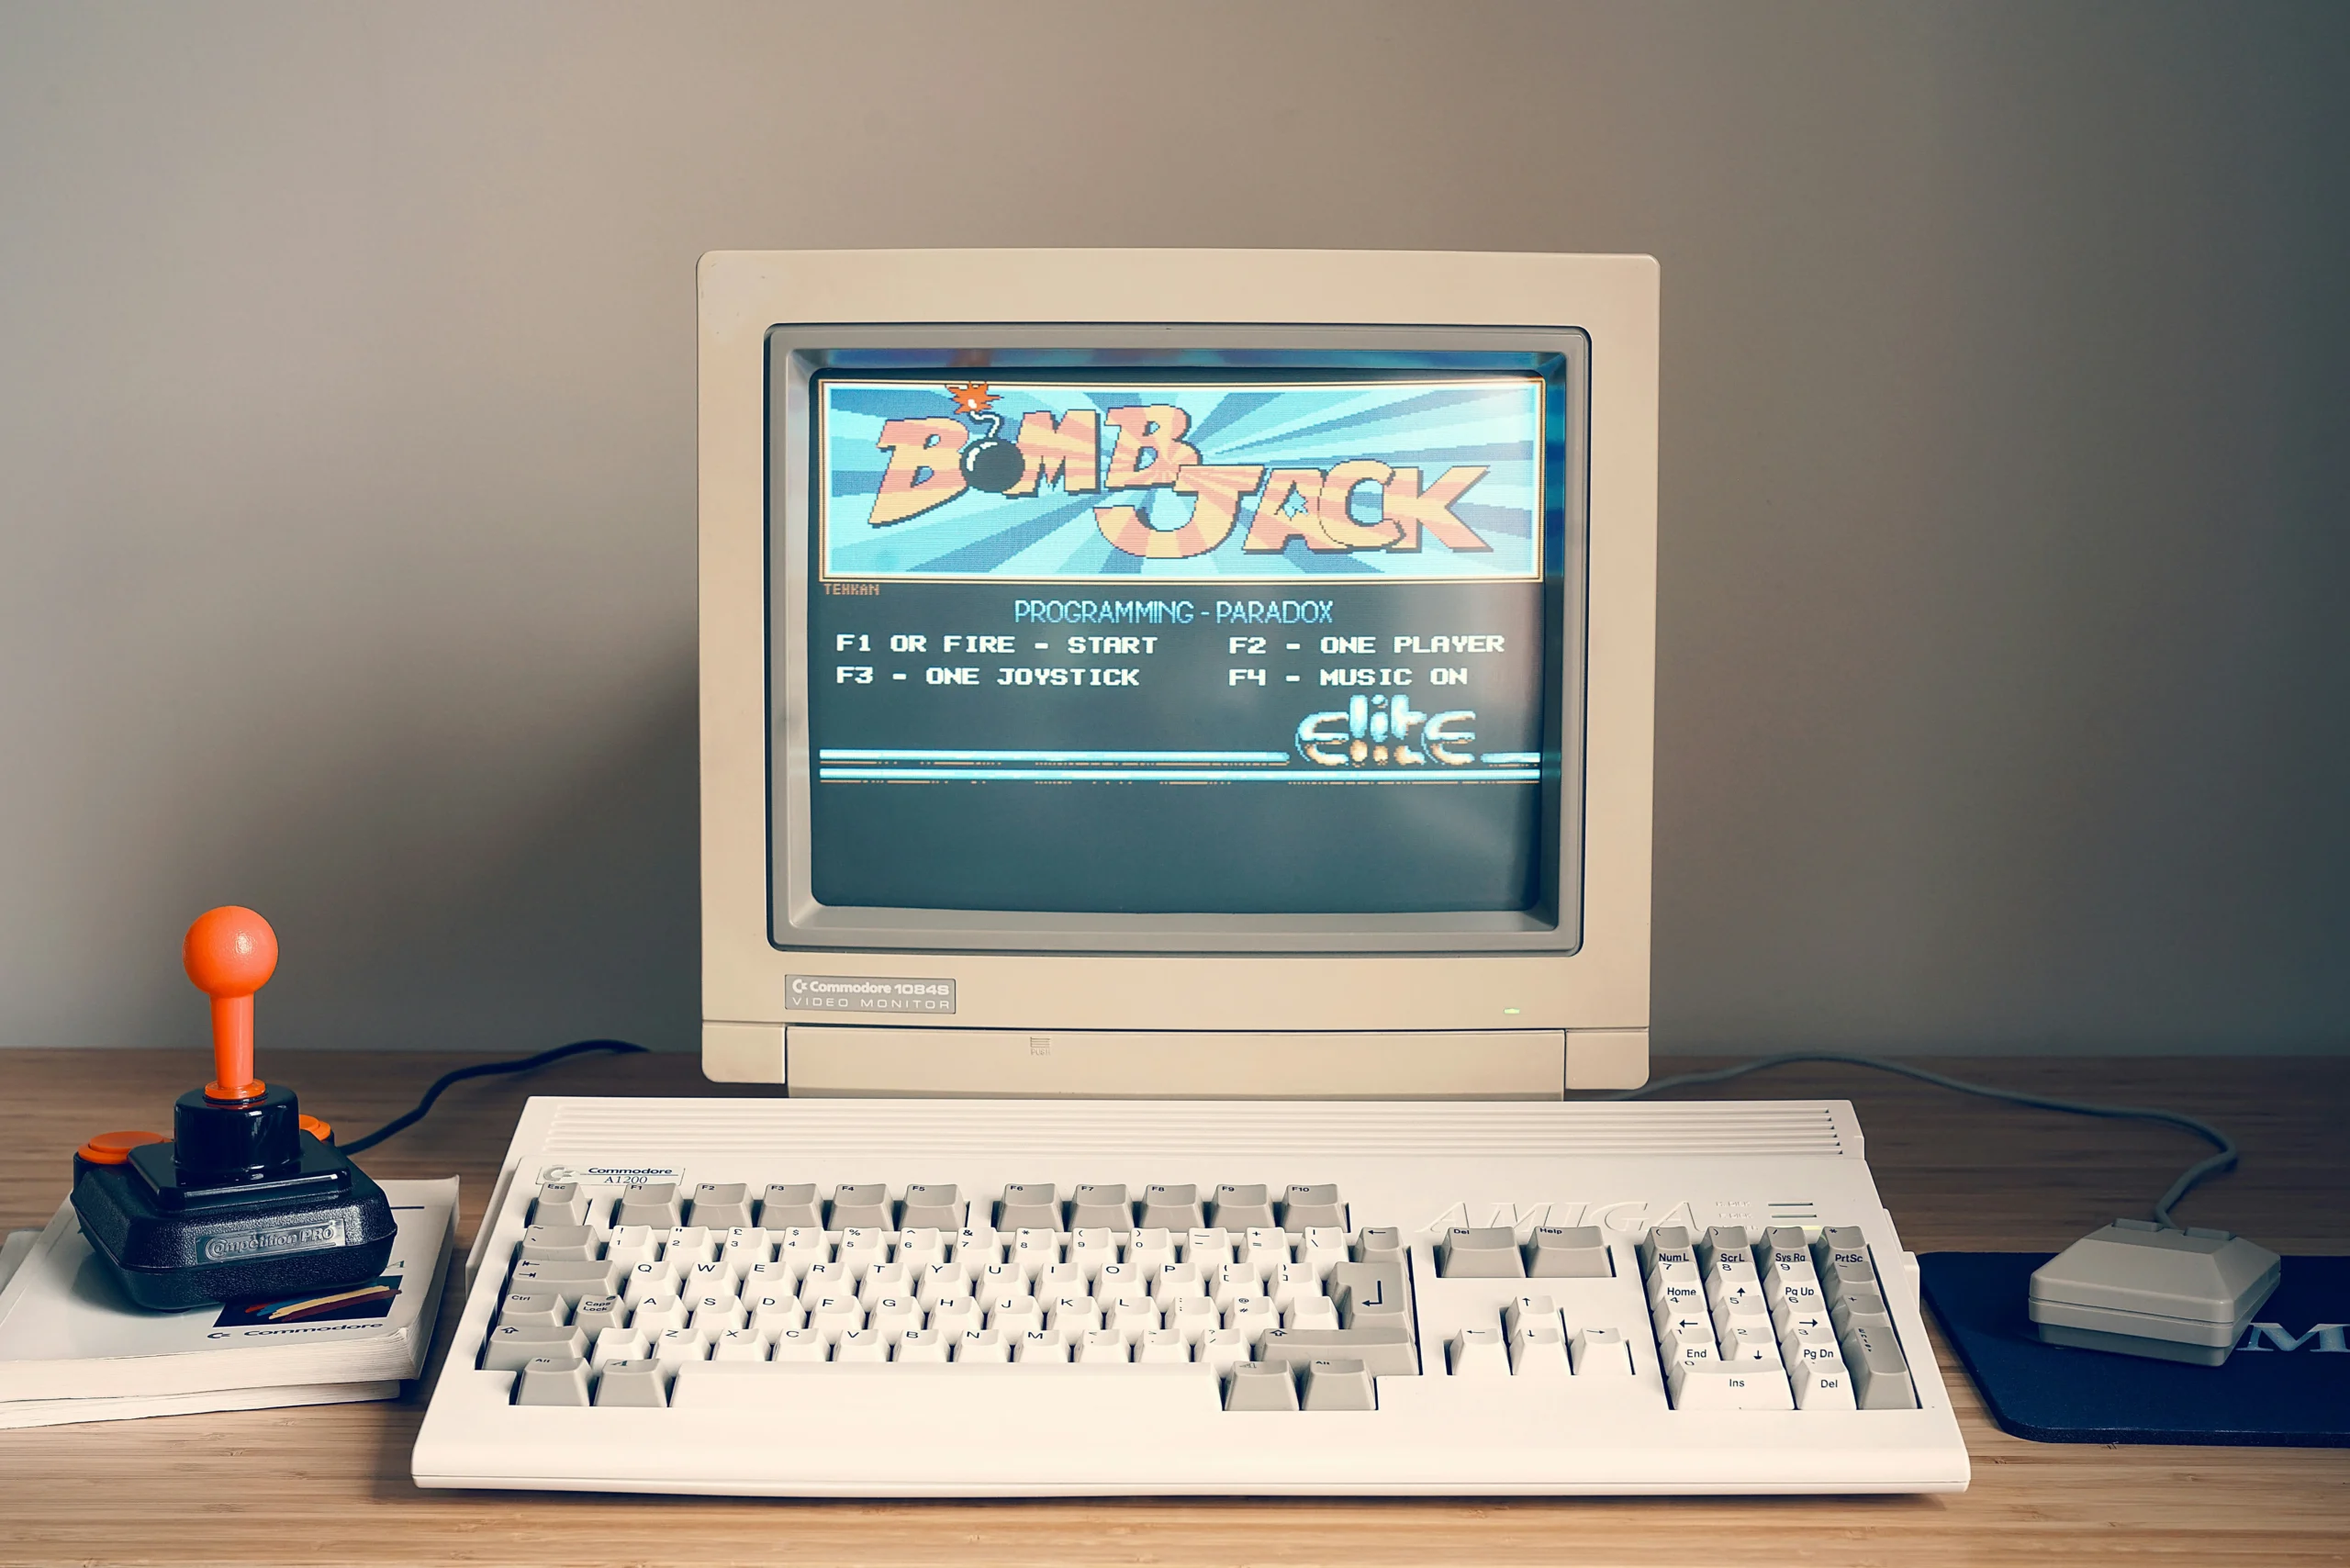 An old computer on a desk showing a retro website.